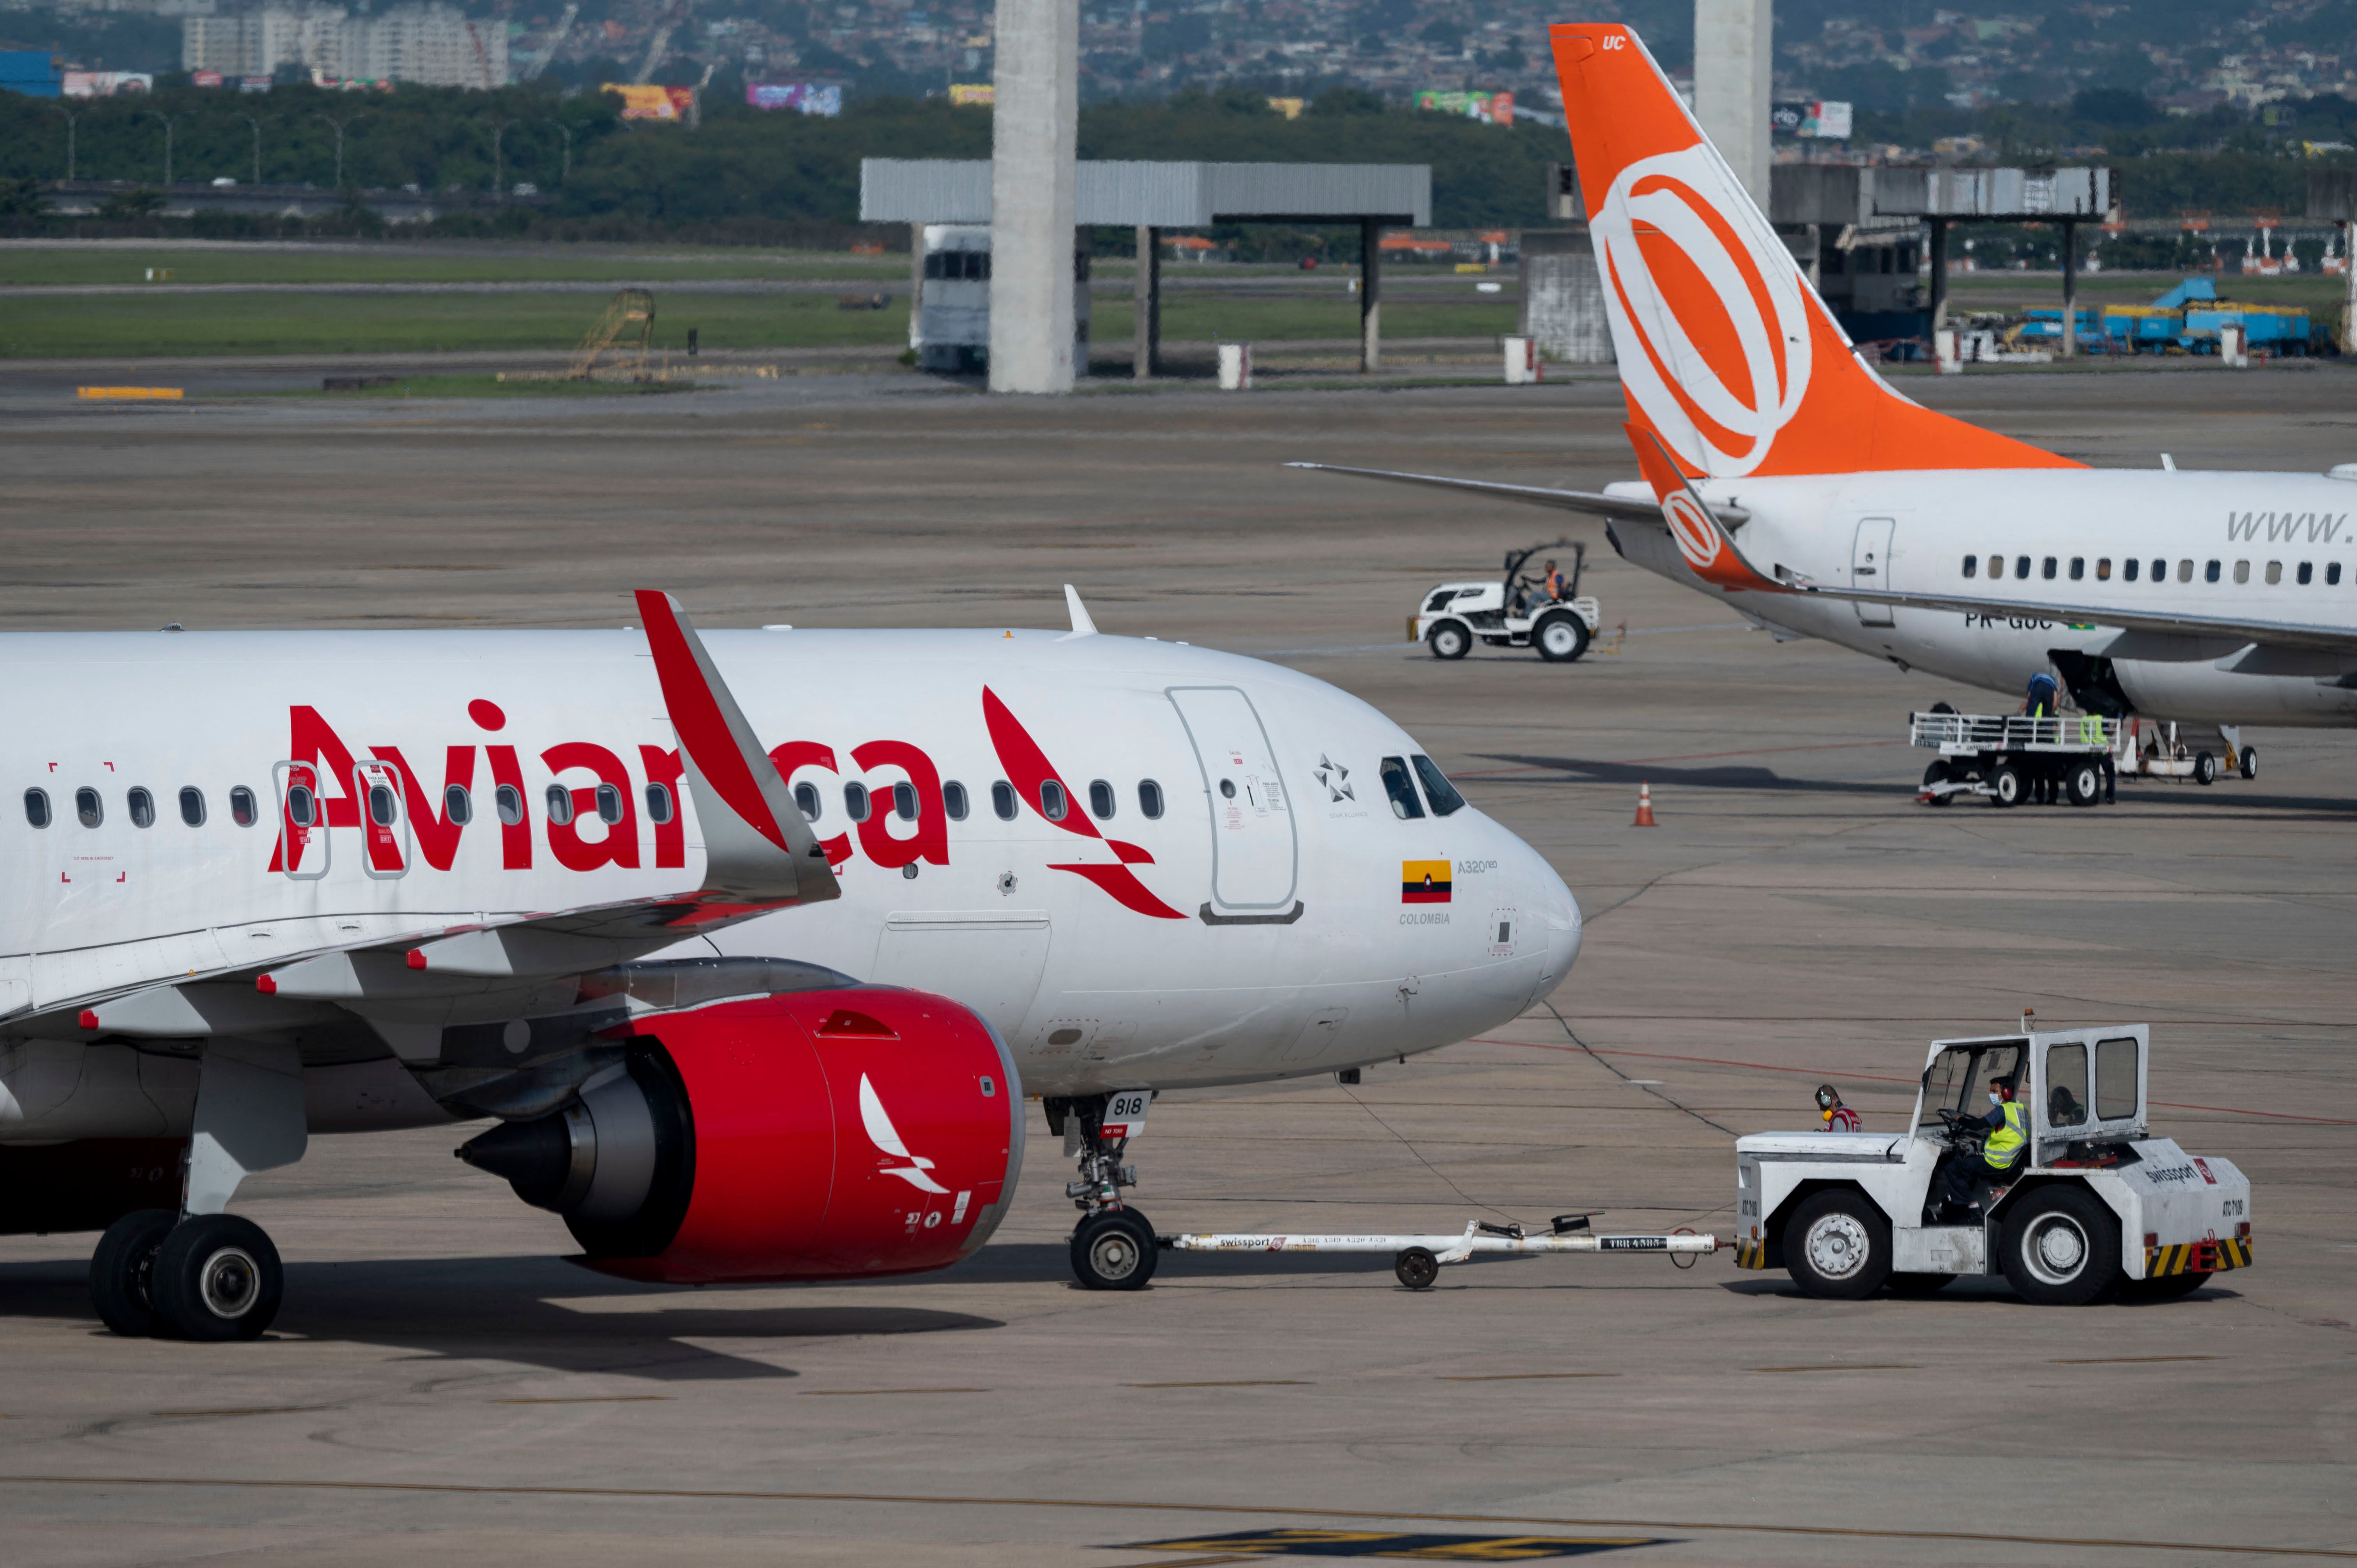 We see an Avianca aircraft and the tail of a GOL Boeing 737 